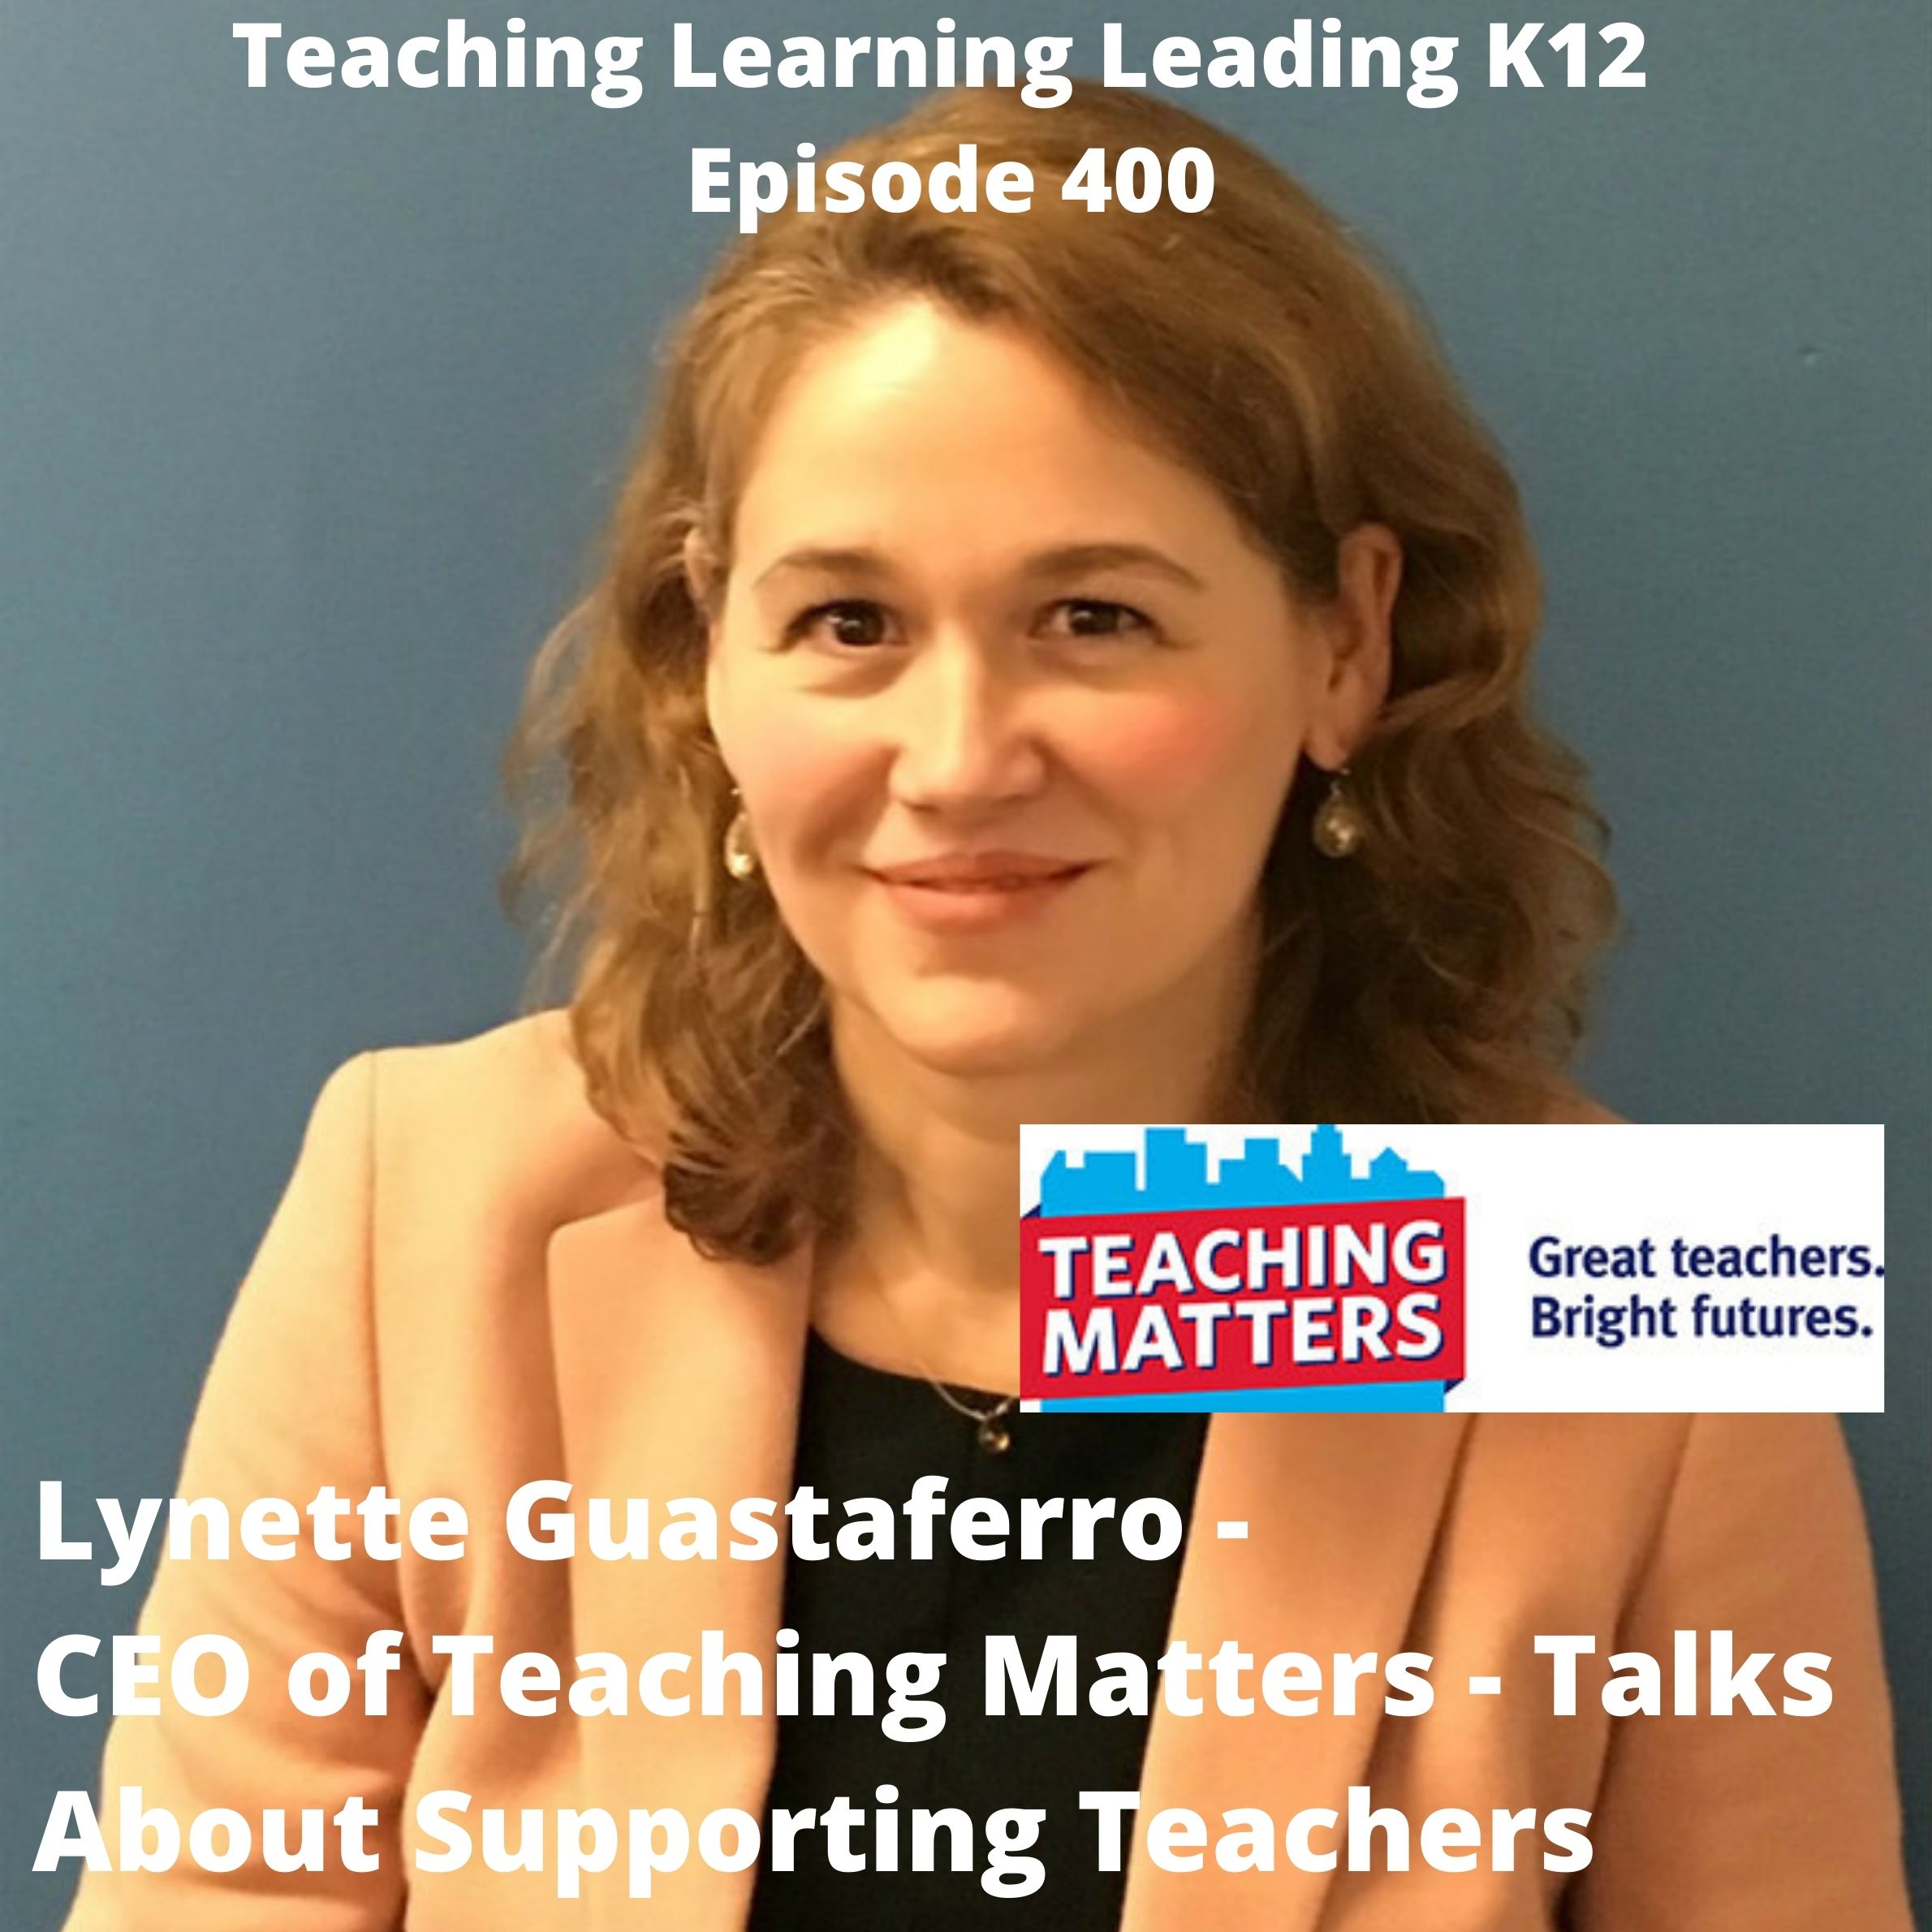 Lynette Guastaferro - CEO of Teaching Matters - Talks About Supporting Teachers - 400 Image